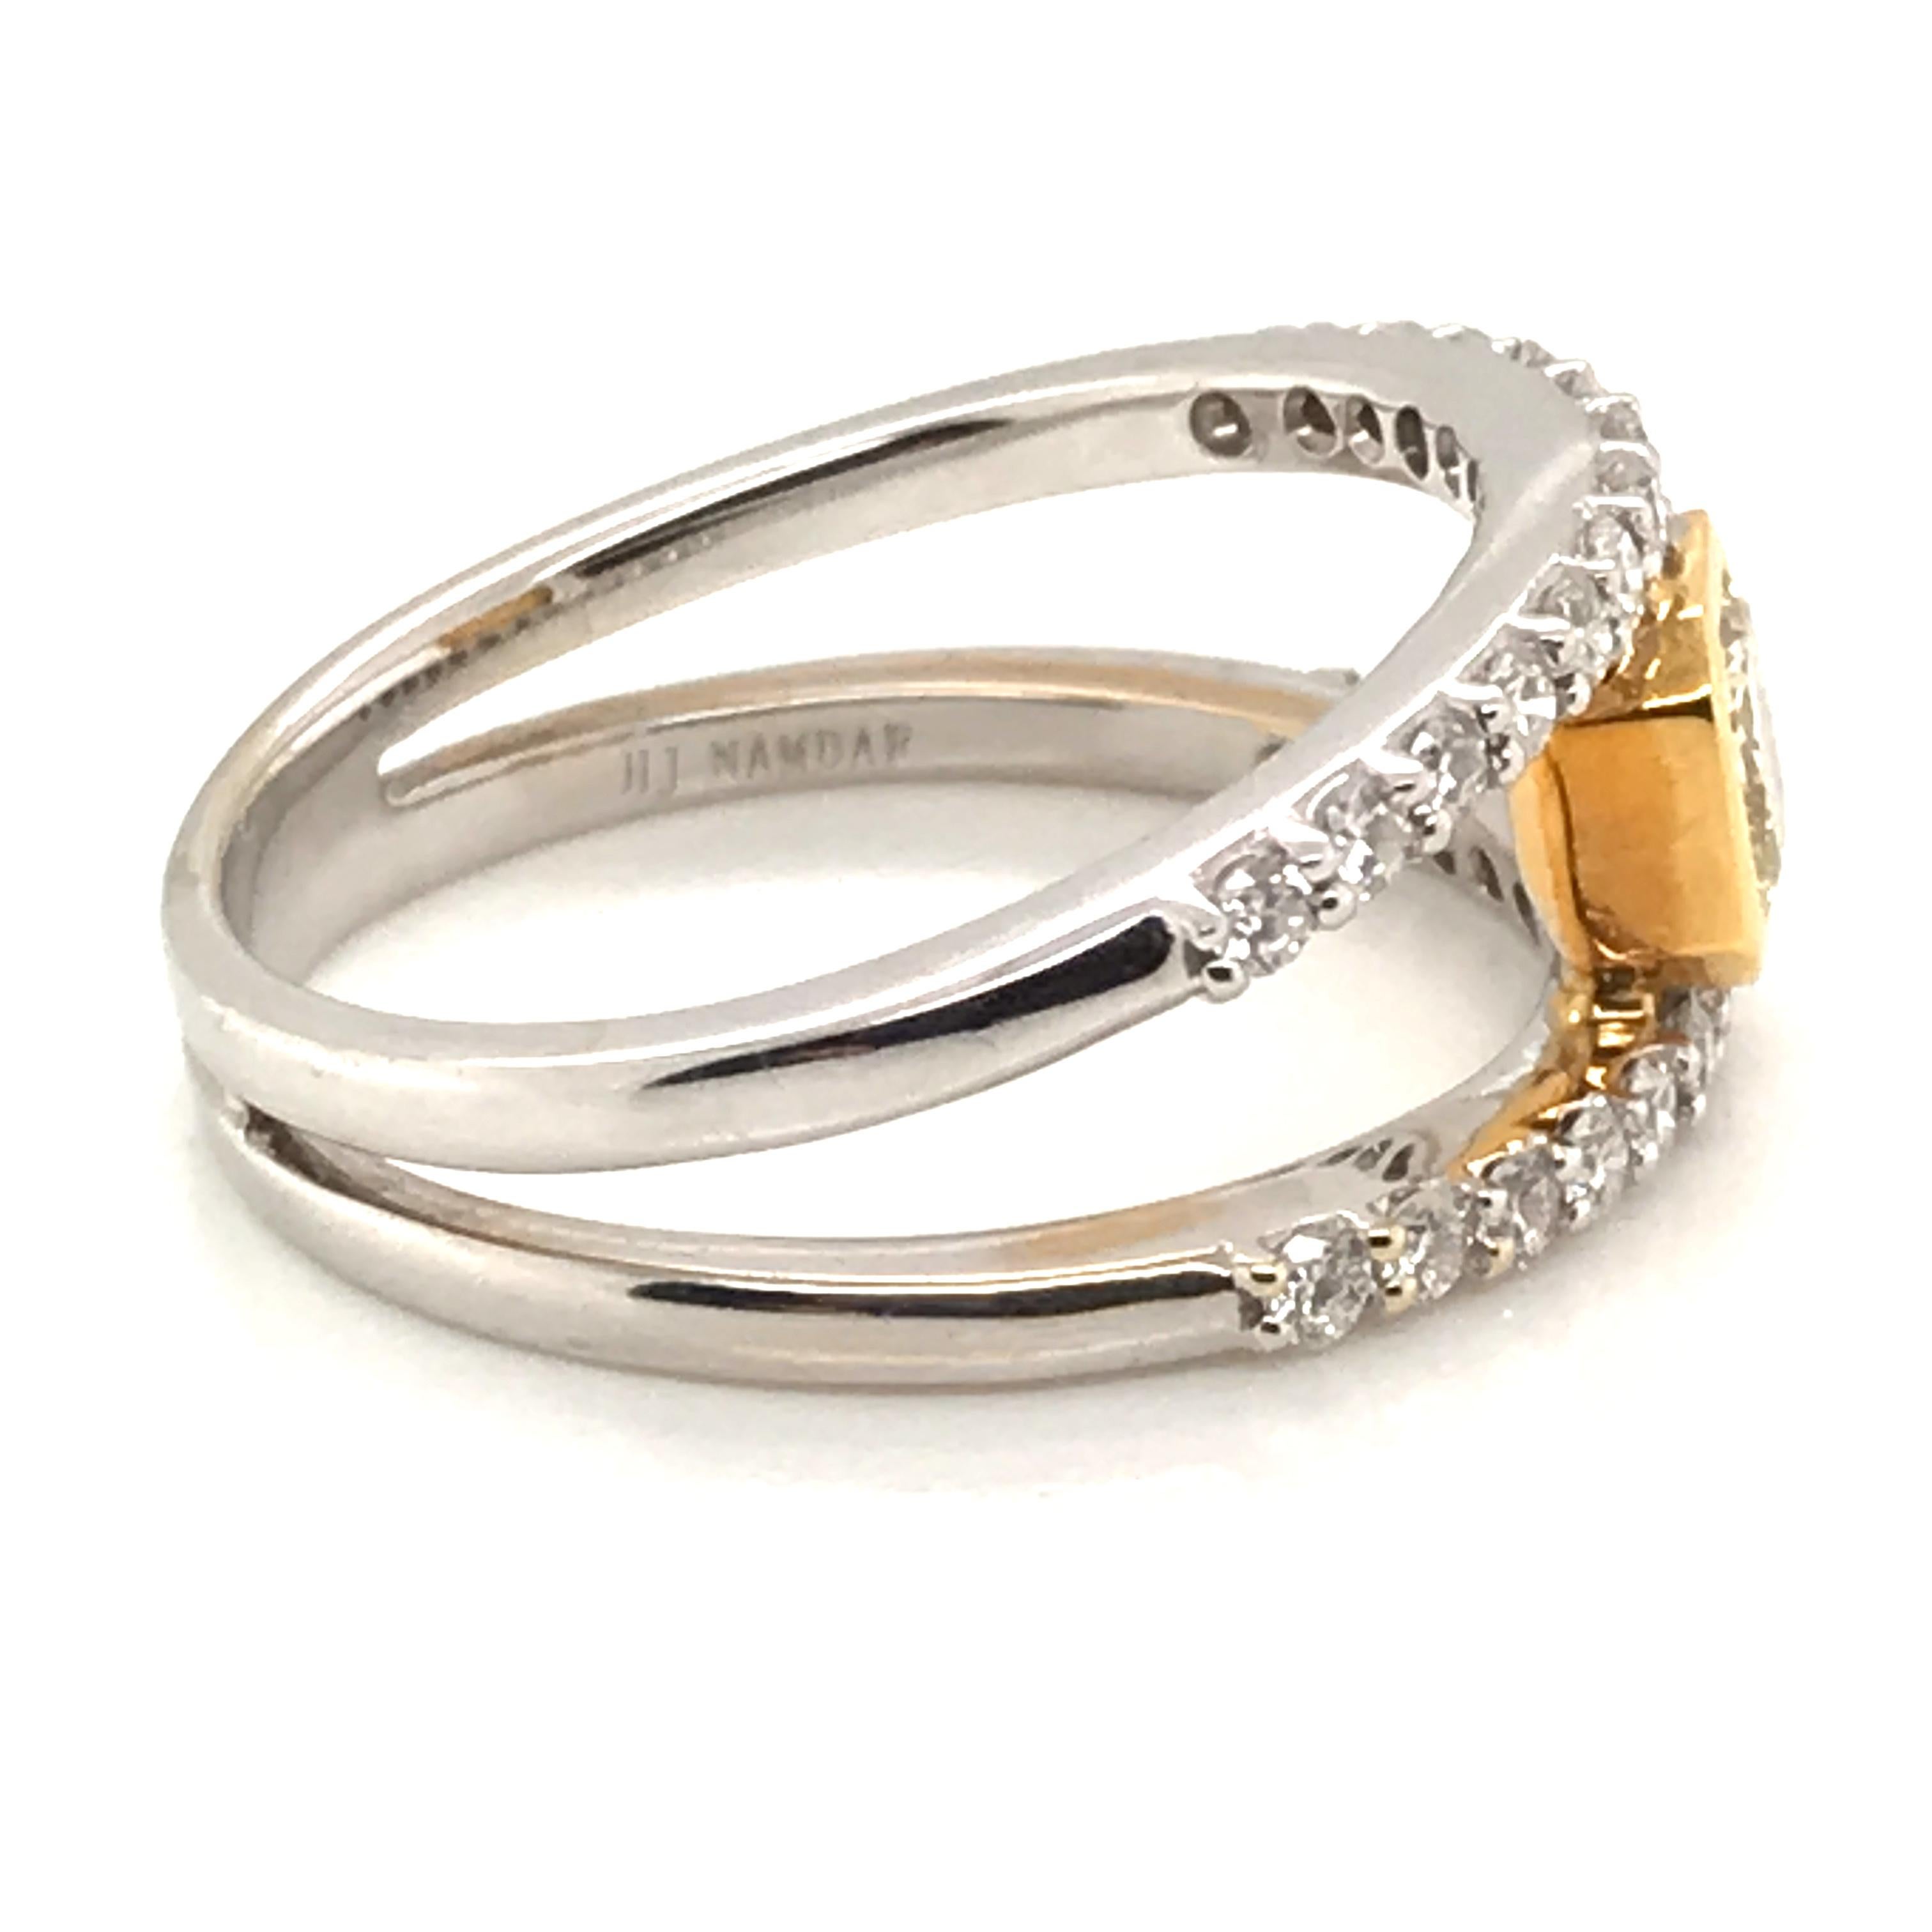 Women's 1.00 Carat Natural Fancy Yellow Diamond Ring with 18 Karat White and Yellow Gold For Sale